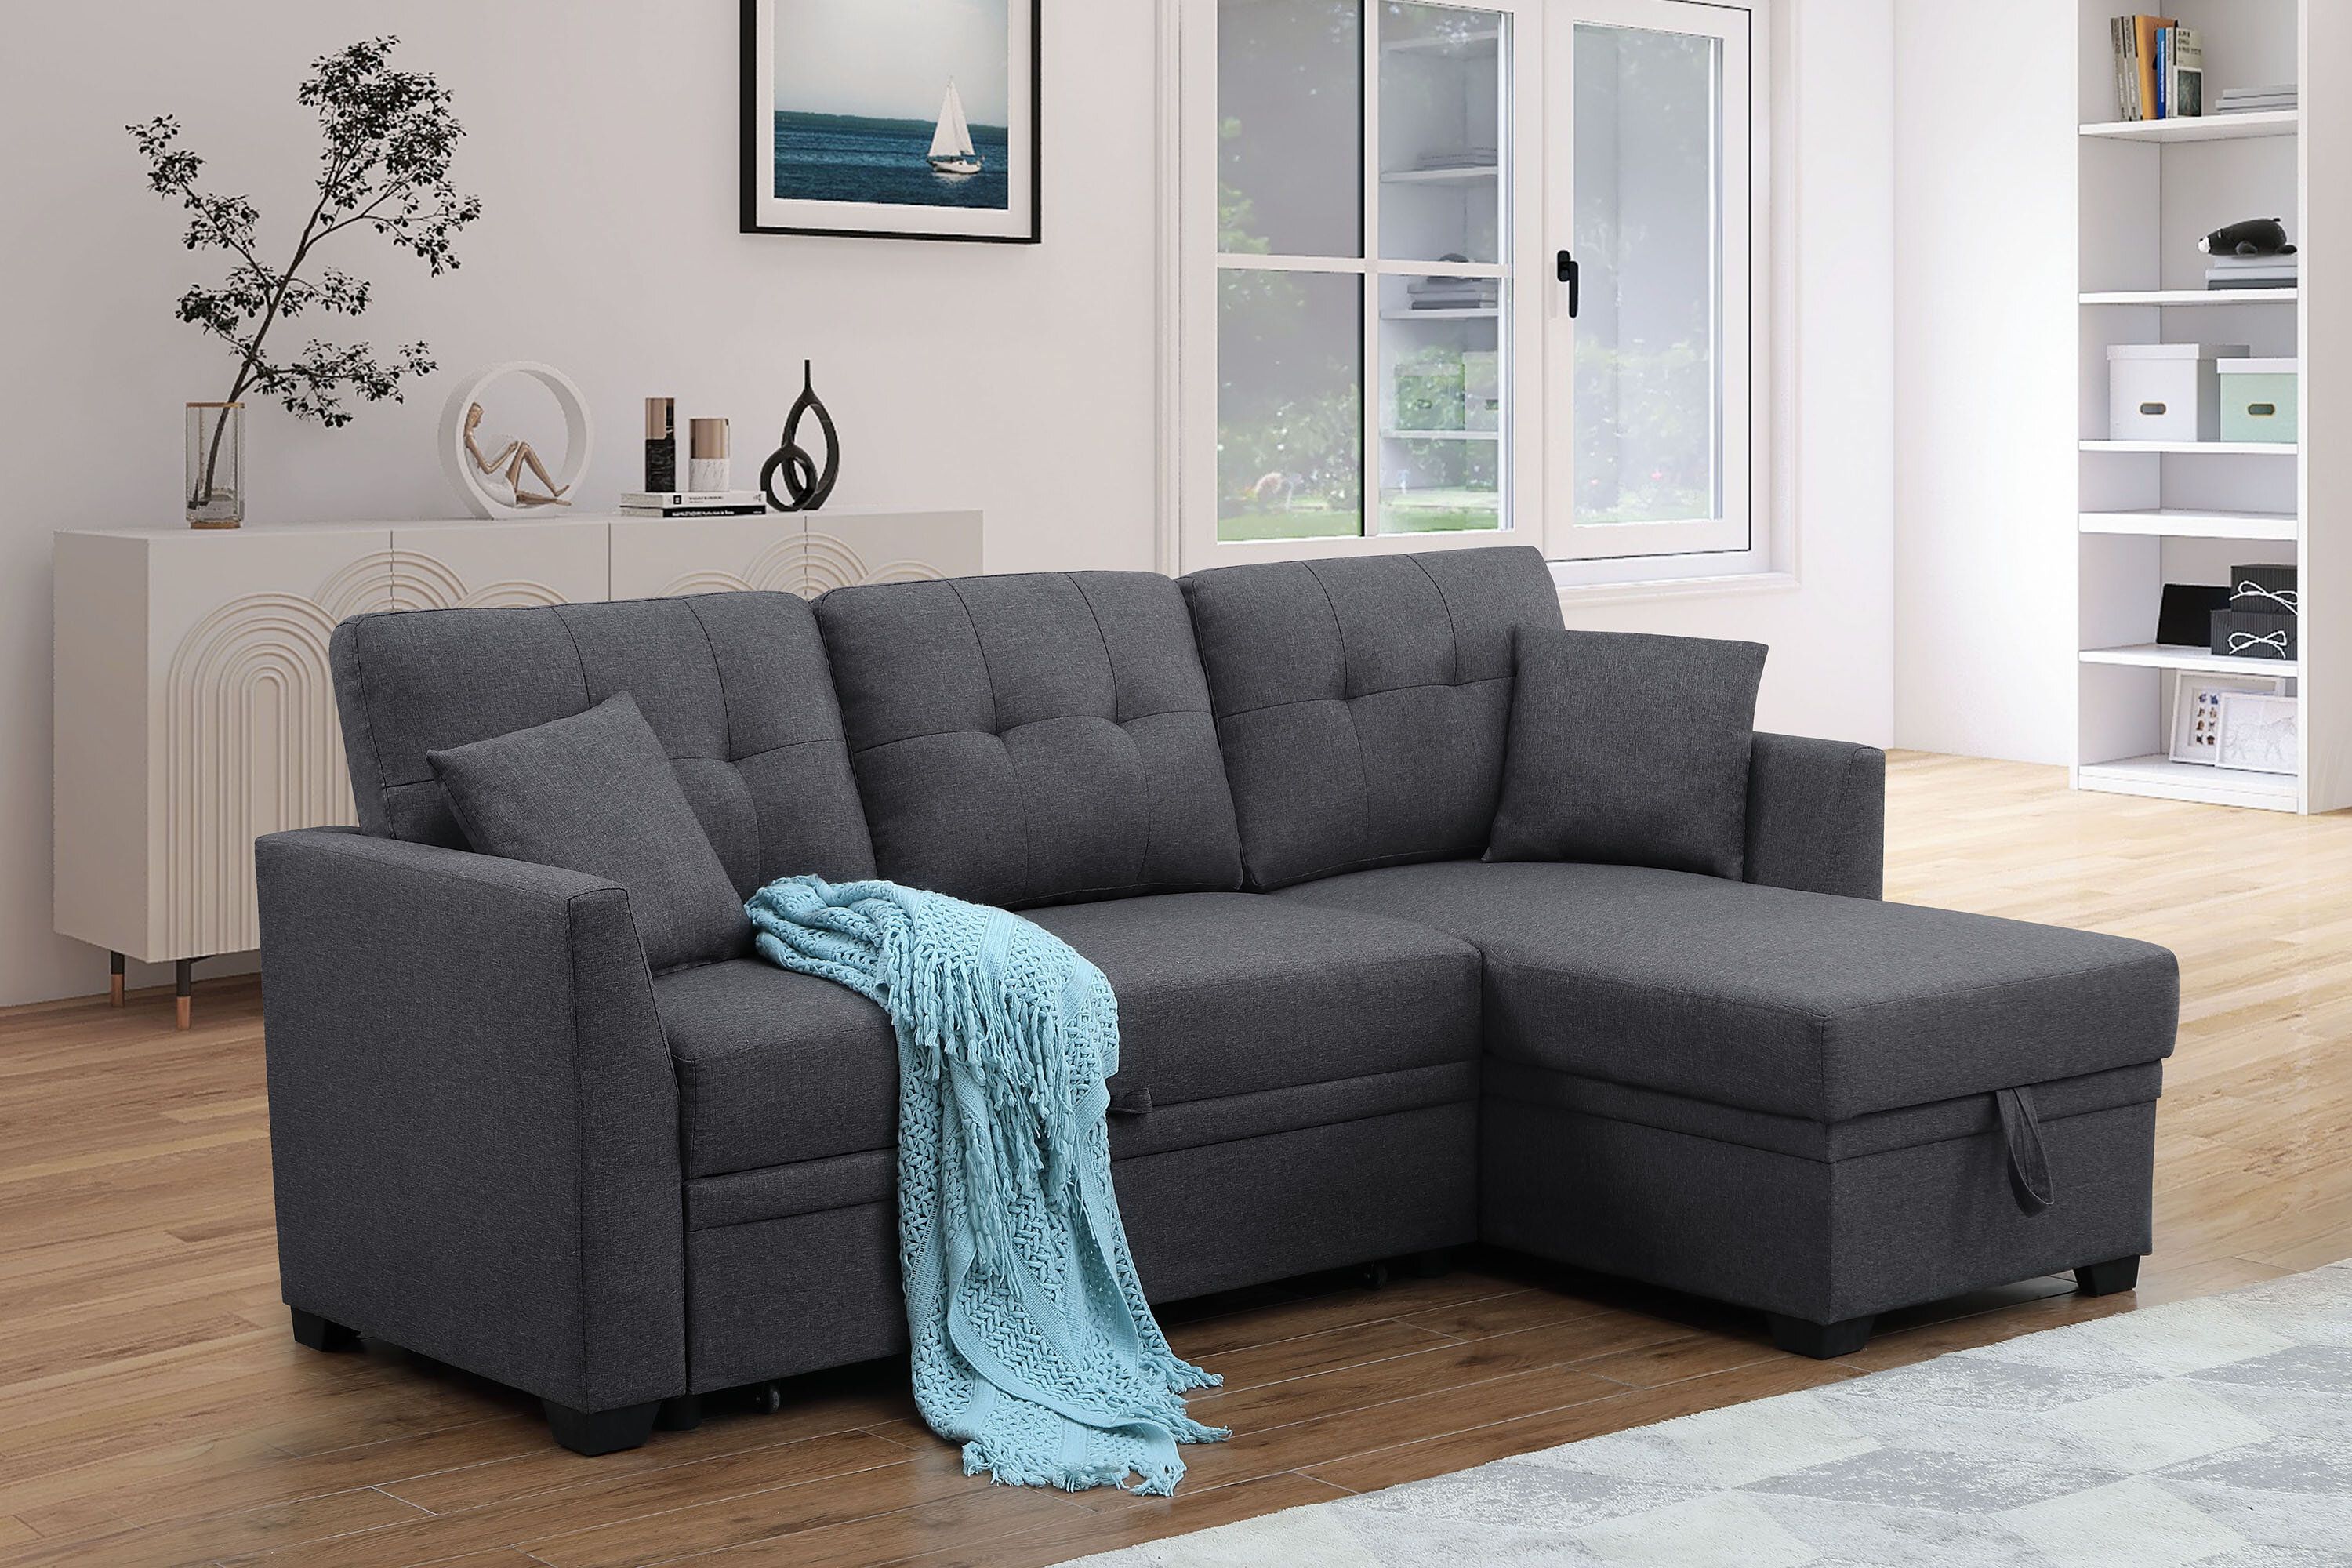 Alexent Sleeper Sofa & Reviews | Wayfair Throughout Pull Out Couch Beds (View 15 of 15)